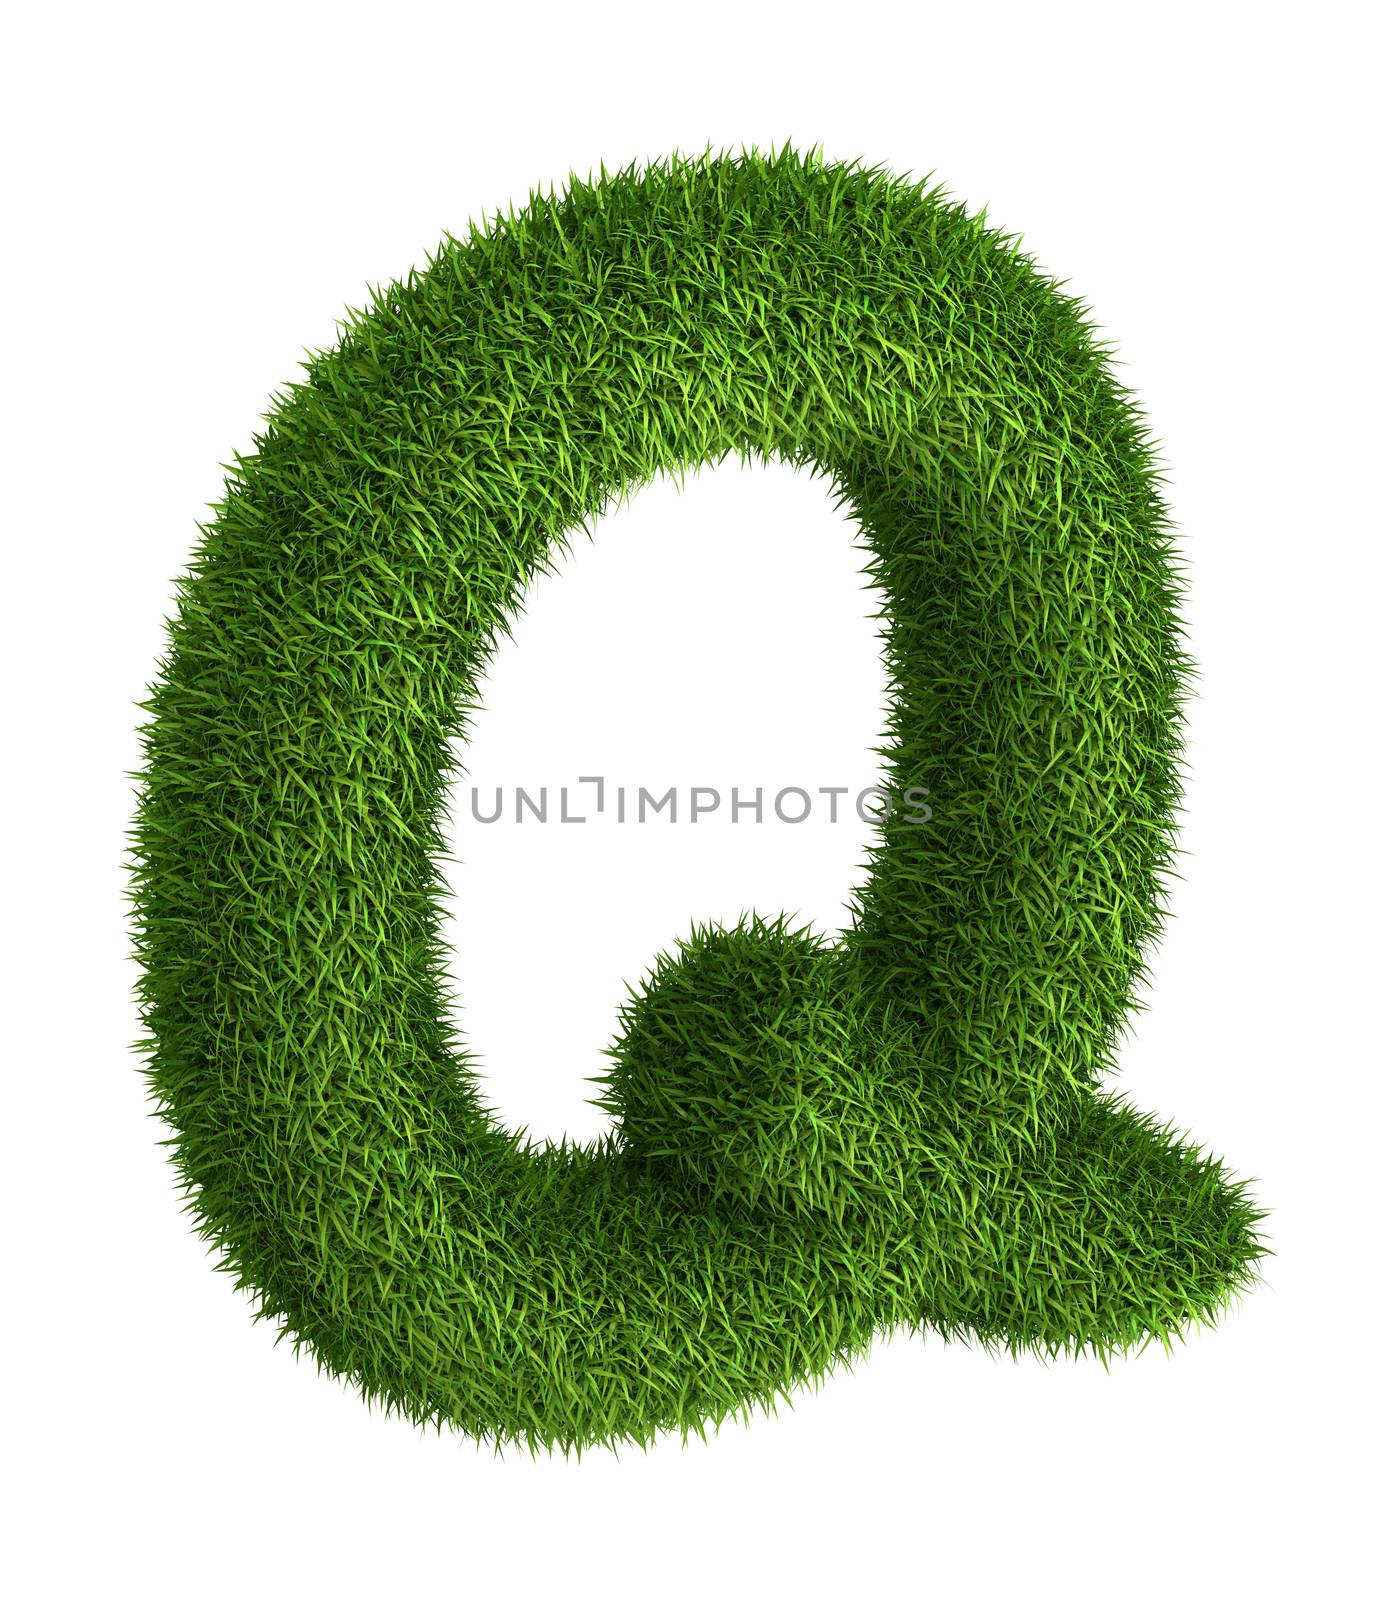 3D Letter Q photo realistic isometric projection grass ecology theme on white